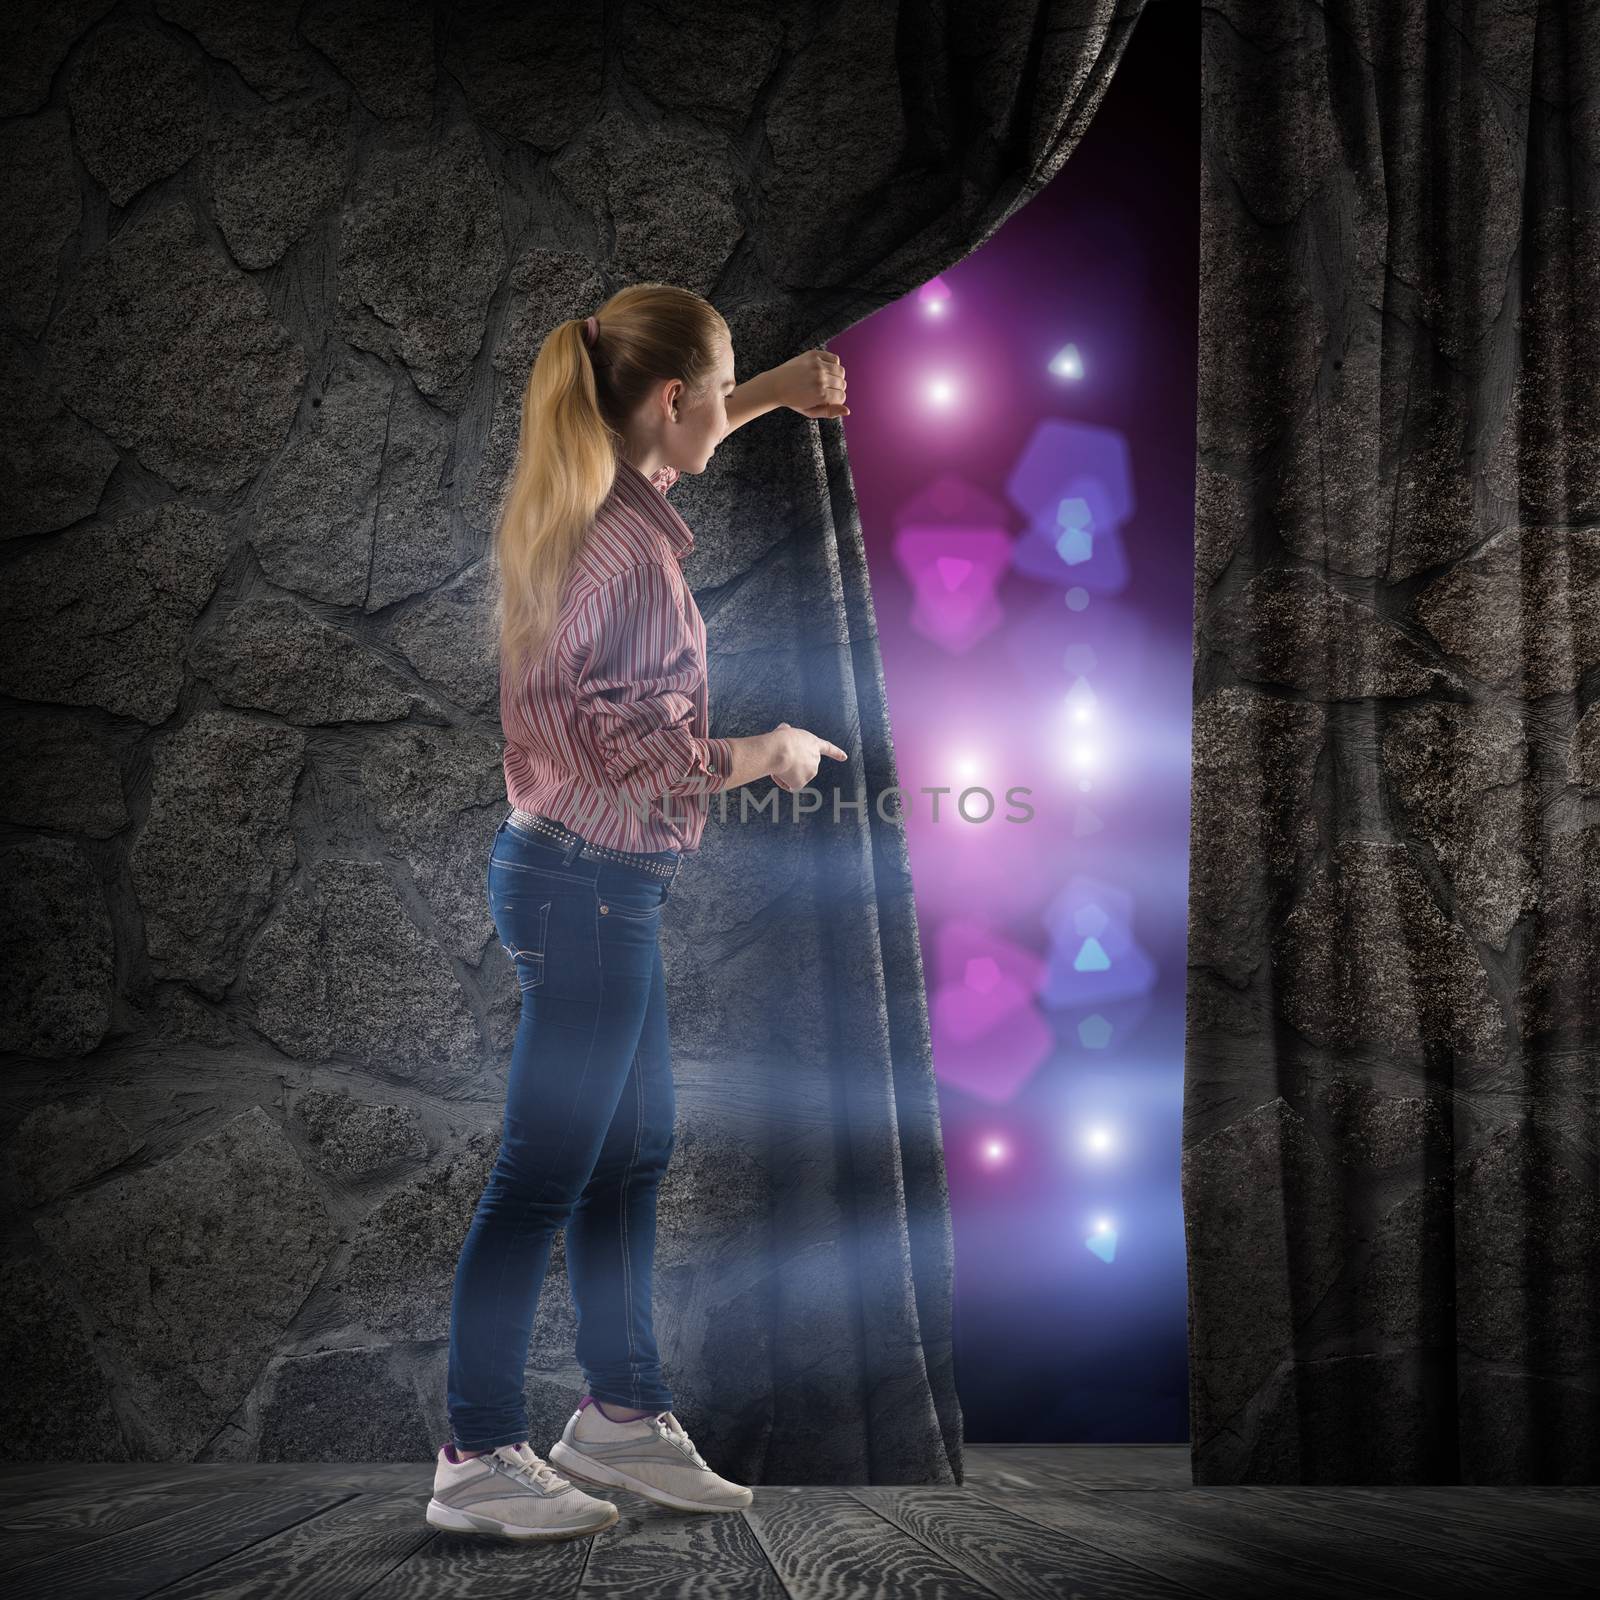 image of a young woman, changes reality, looking at the lights of a stone wall